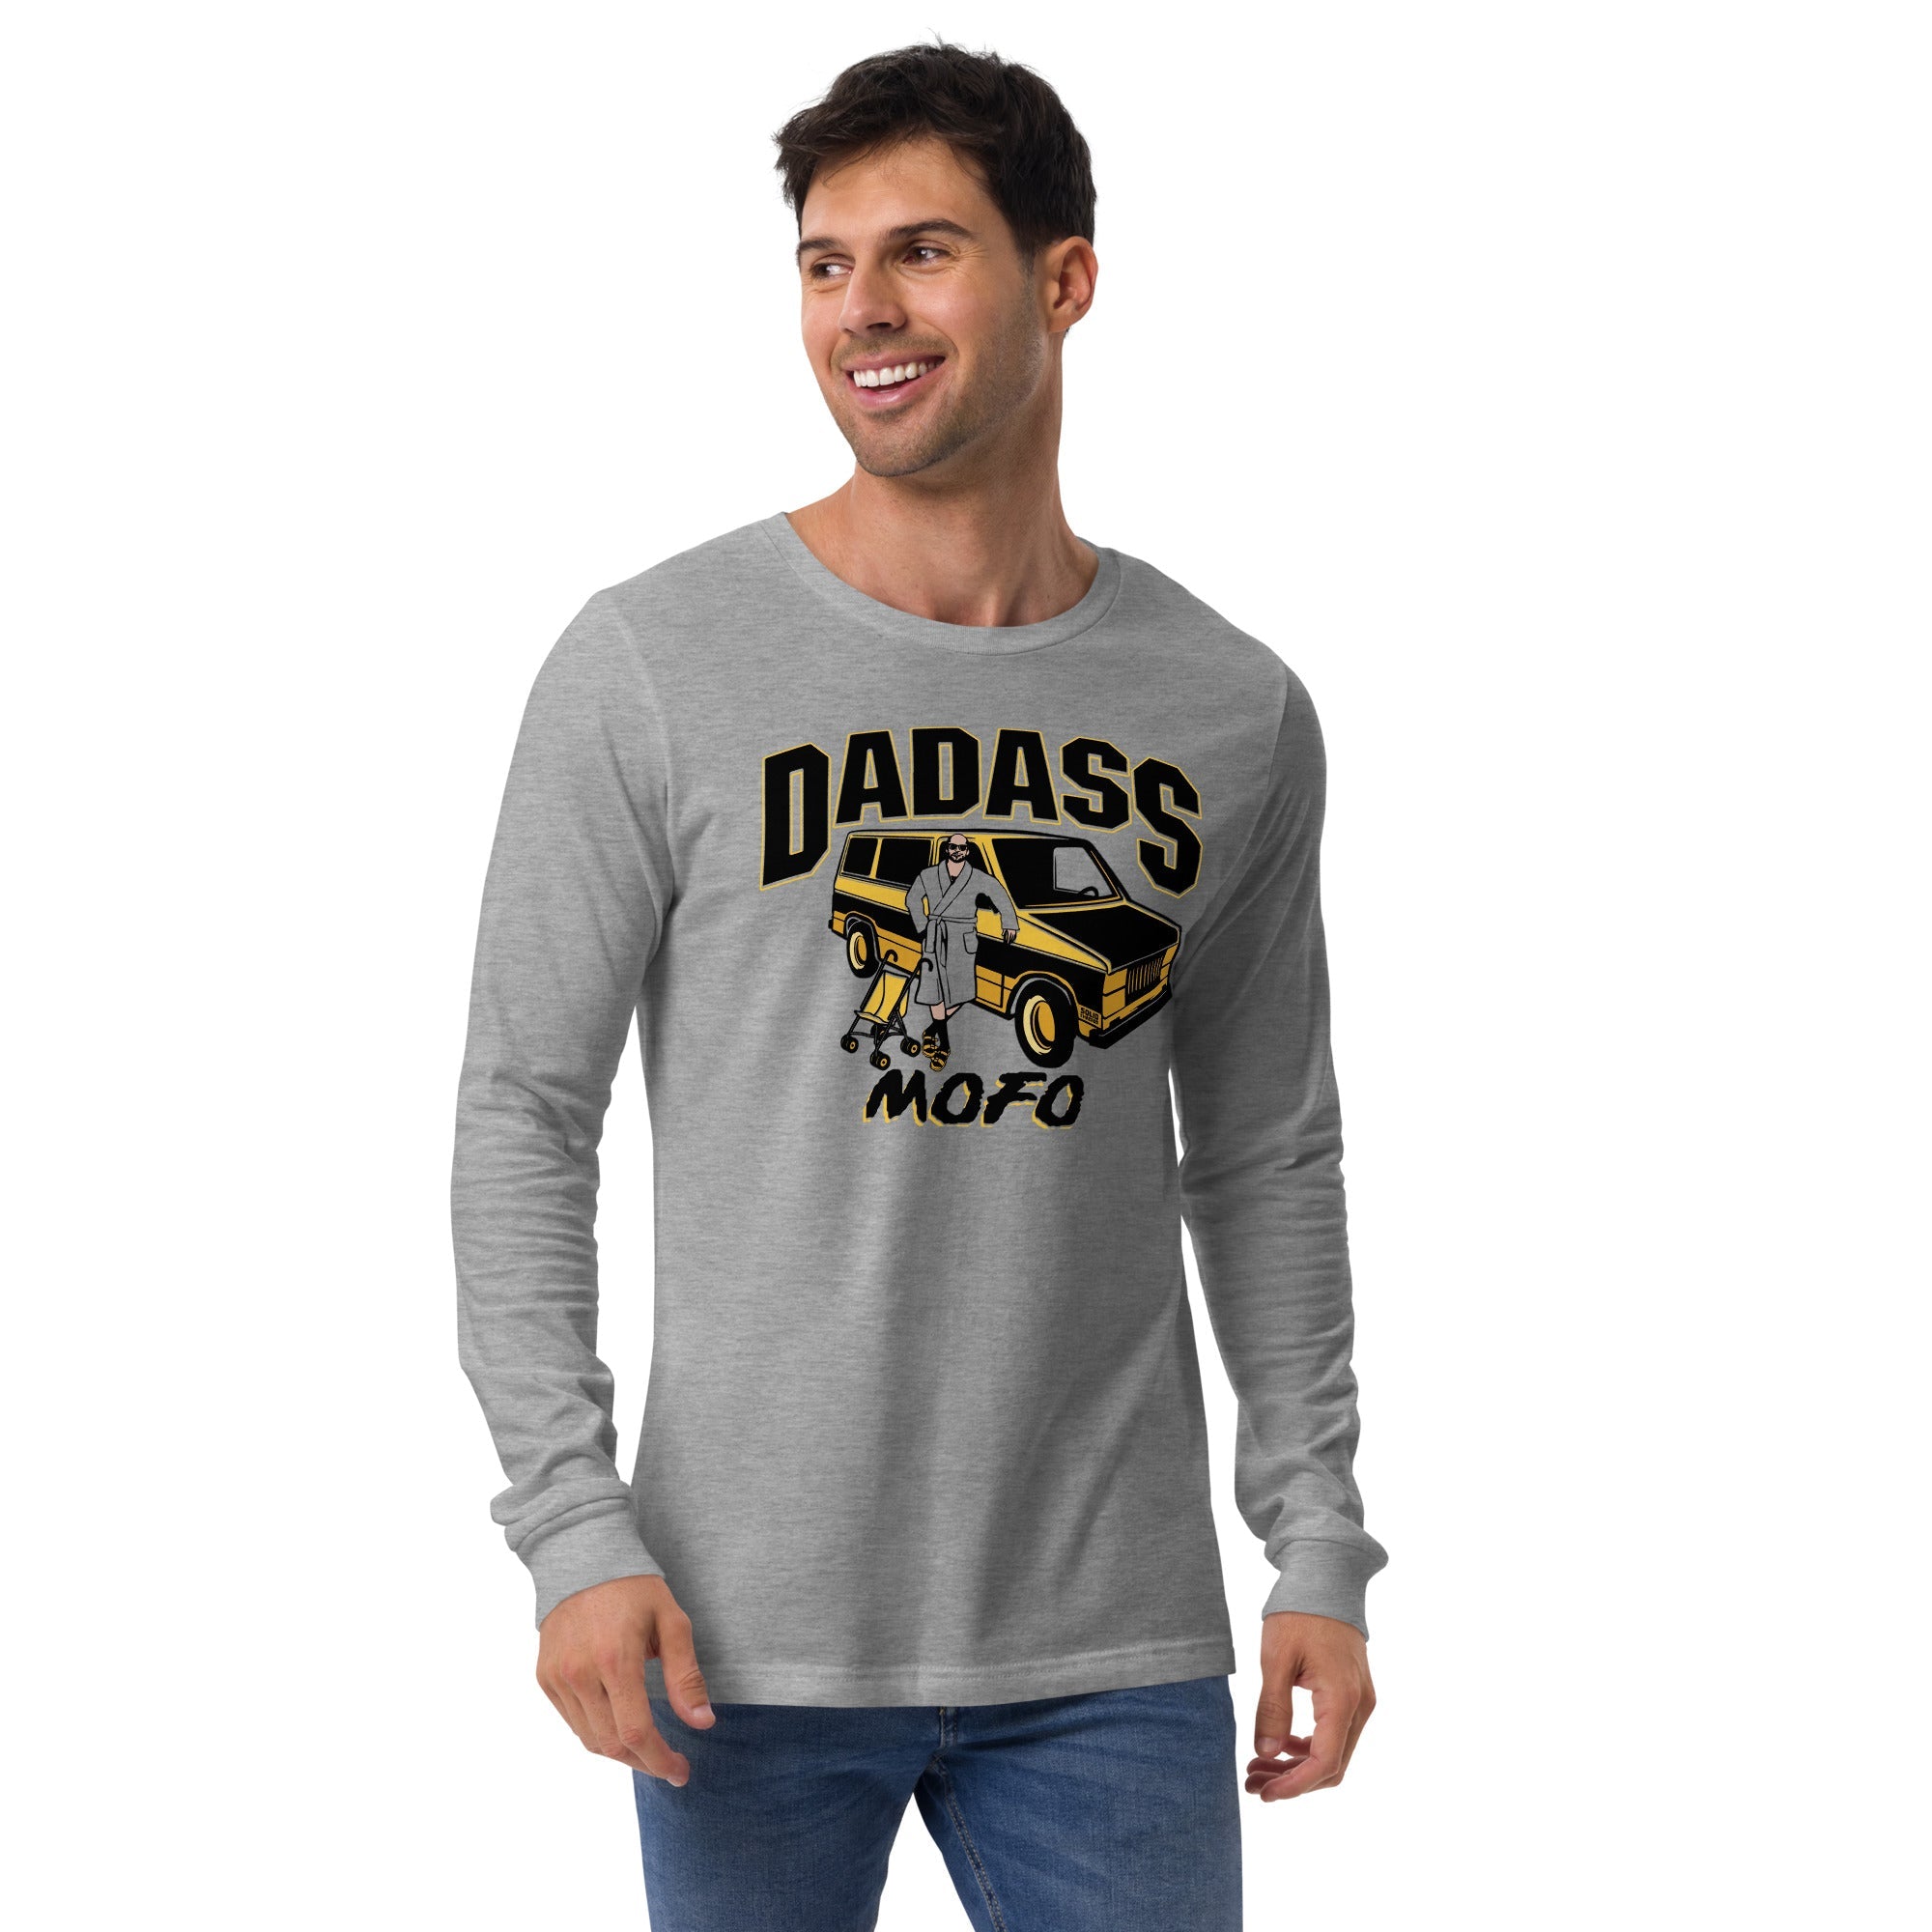 Men's Dadass Vintage Long Sleeve T Shirt | Funny Parenting Graphic Tee | Solid Threads